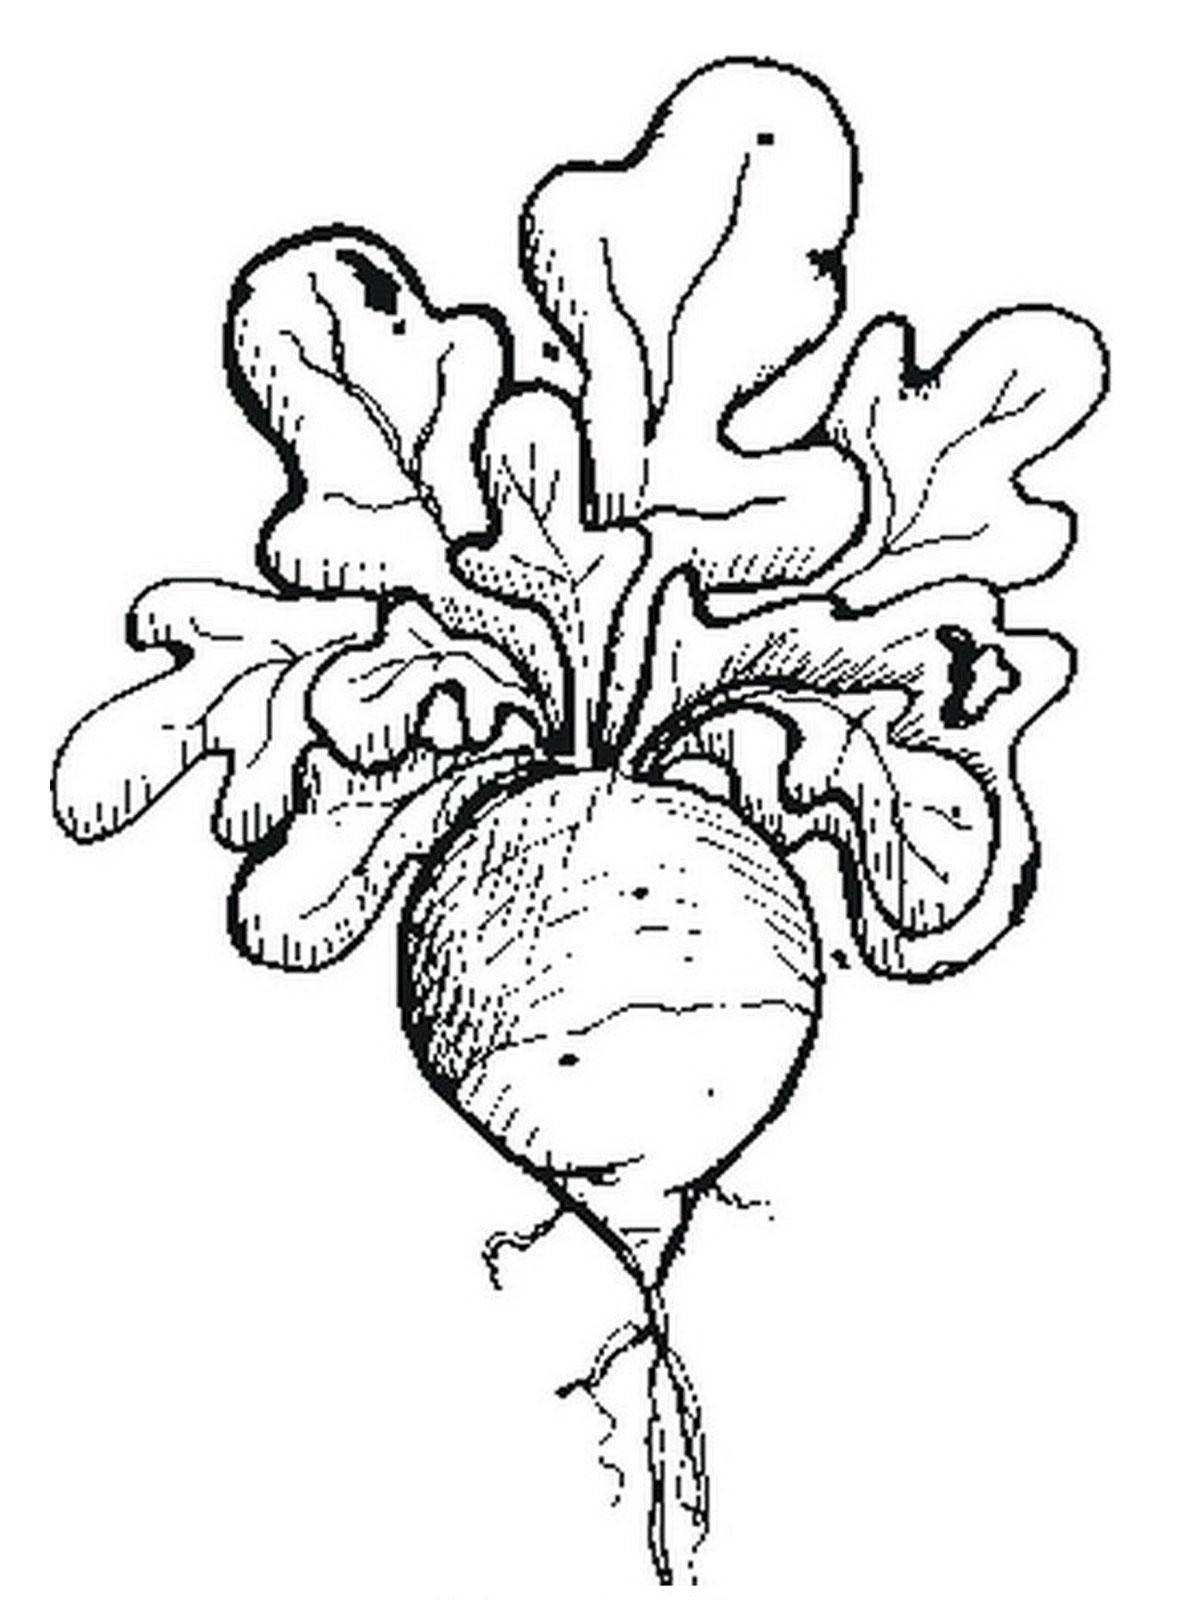 Coloring Turnips. Category vegetables. Tags:  turnips.